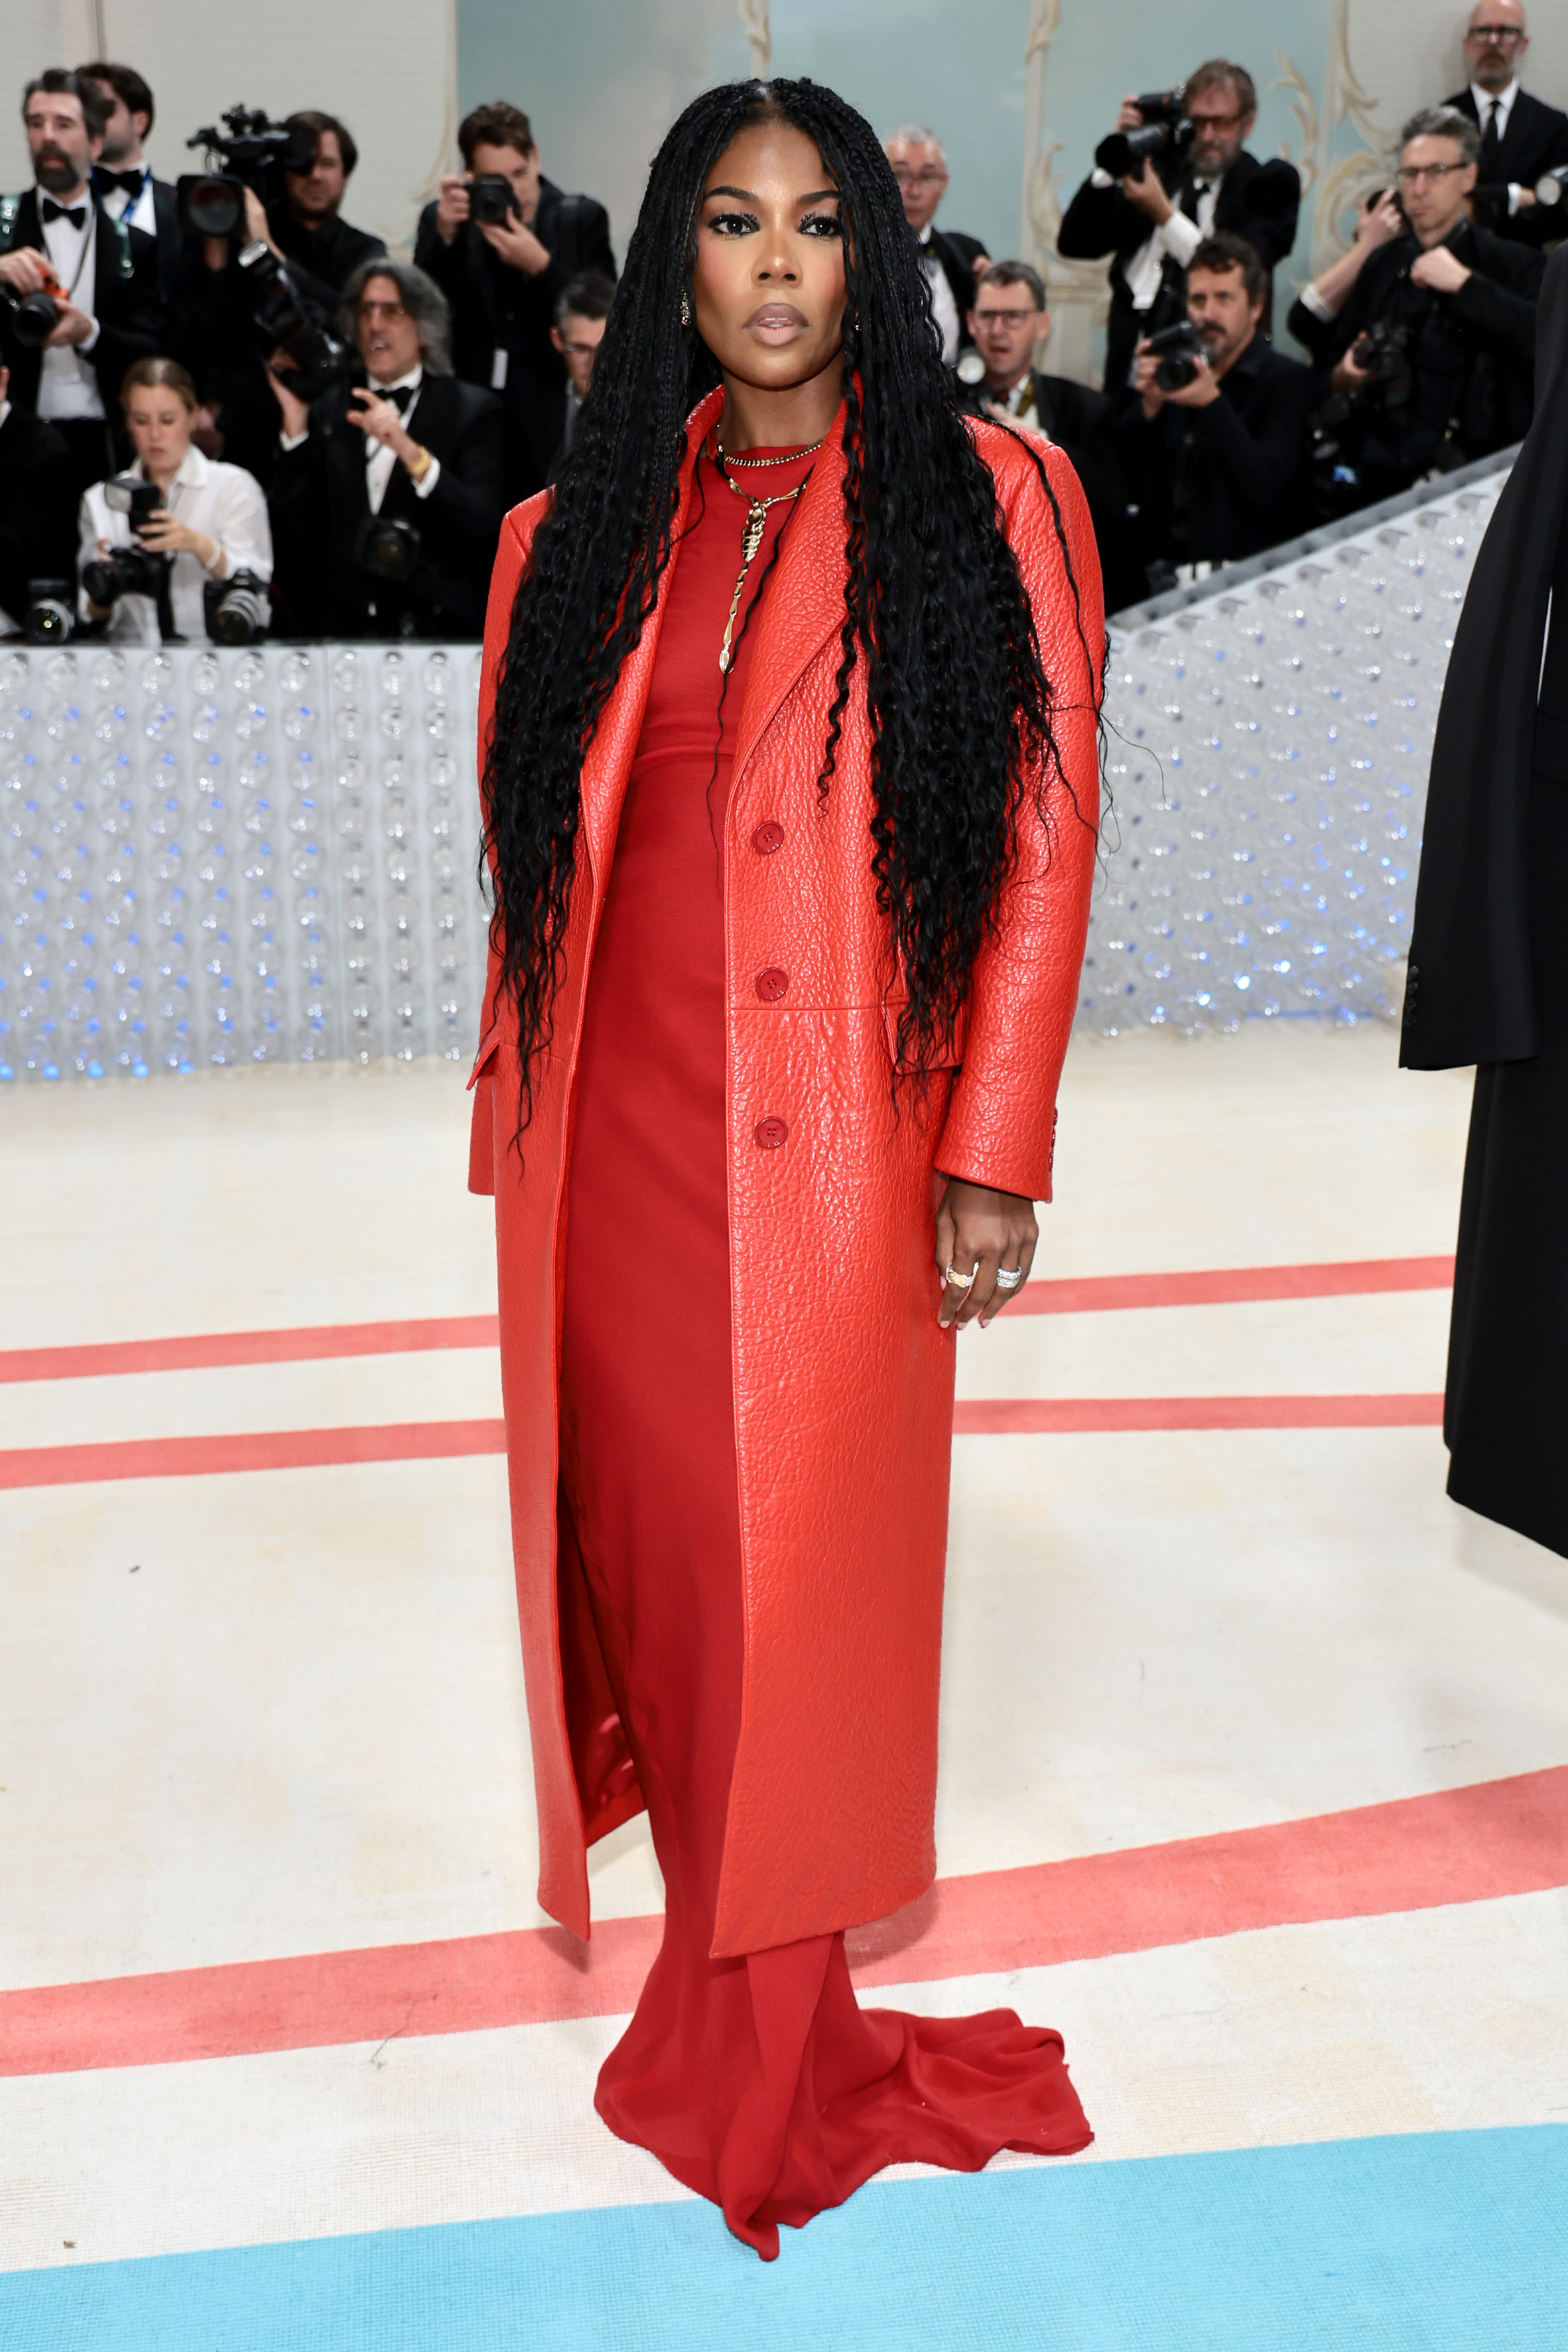 Gabrielle Union is archiving her Met Gala looks and more for daughter Kaavia James